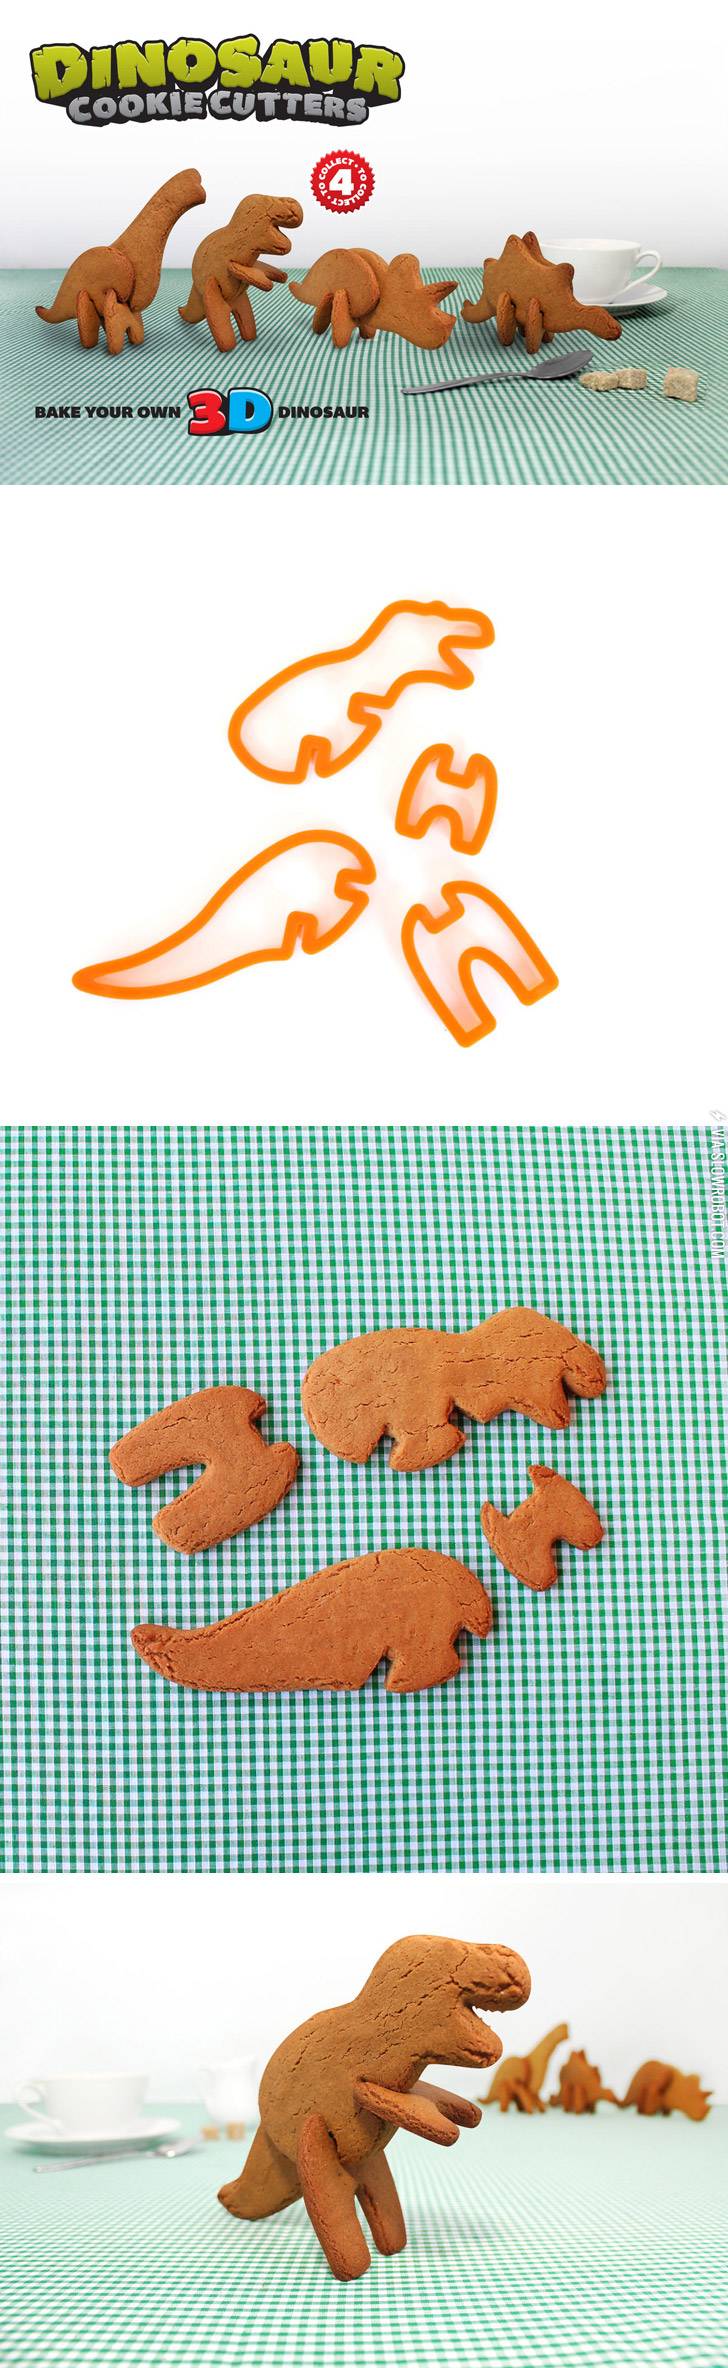 Make+your+own+3D+dinosaur+cookies.